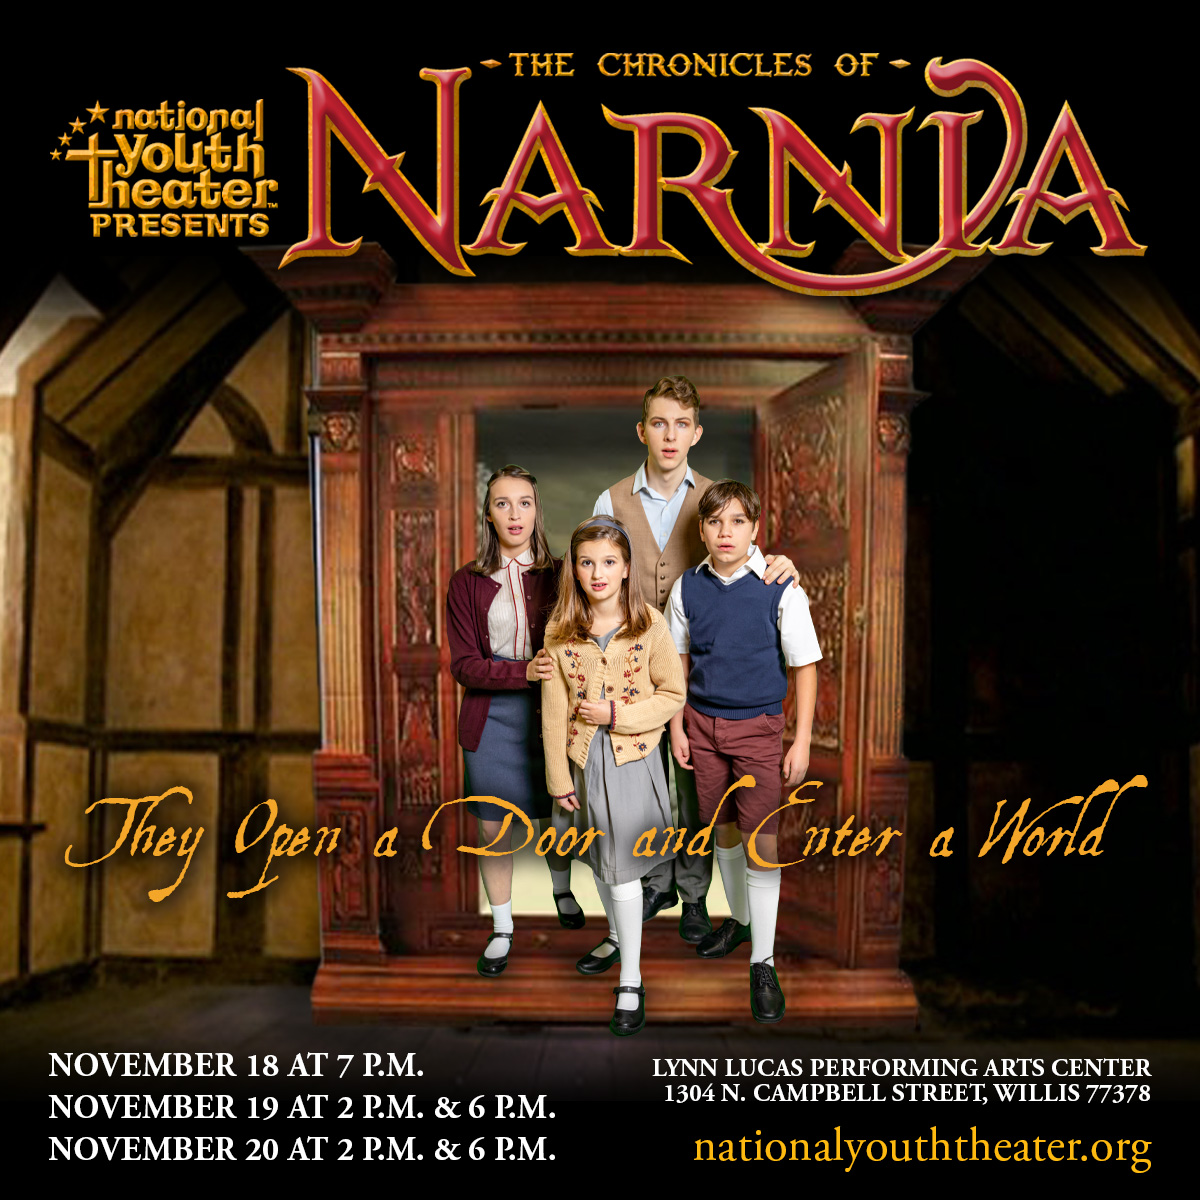 National Youth Theater presents Narnia